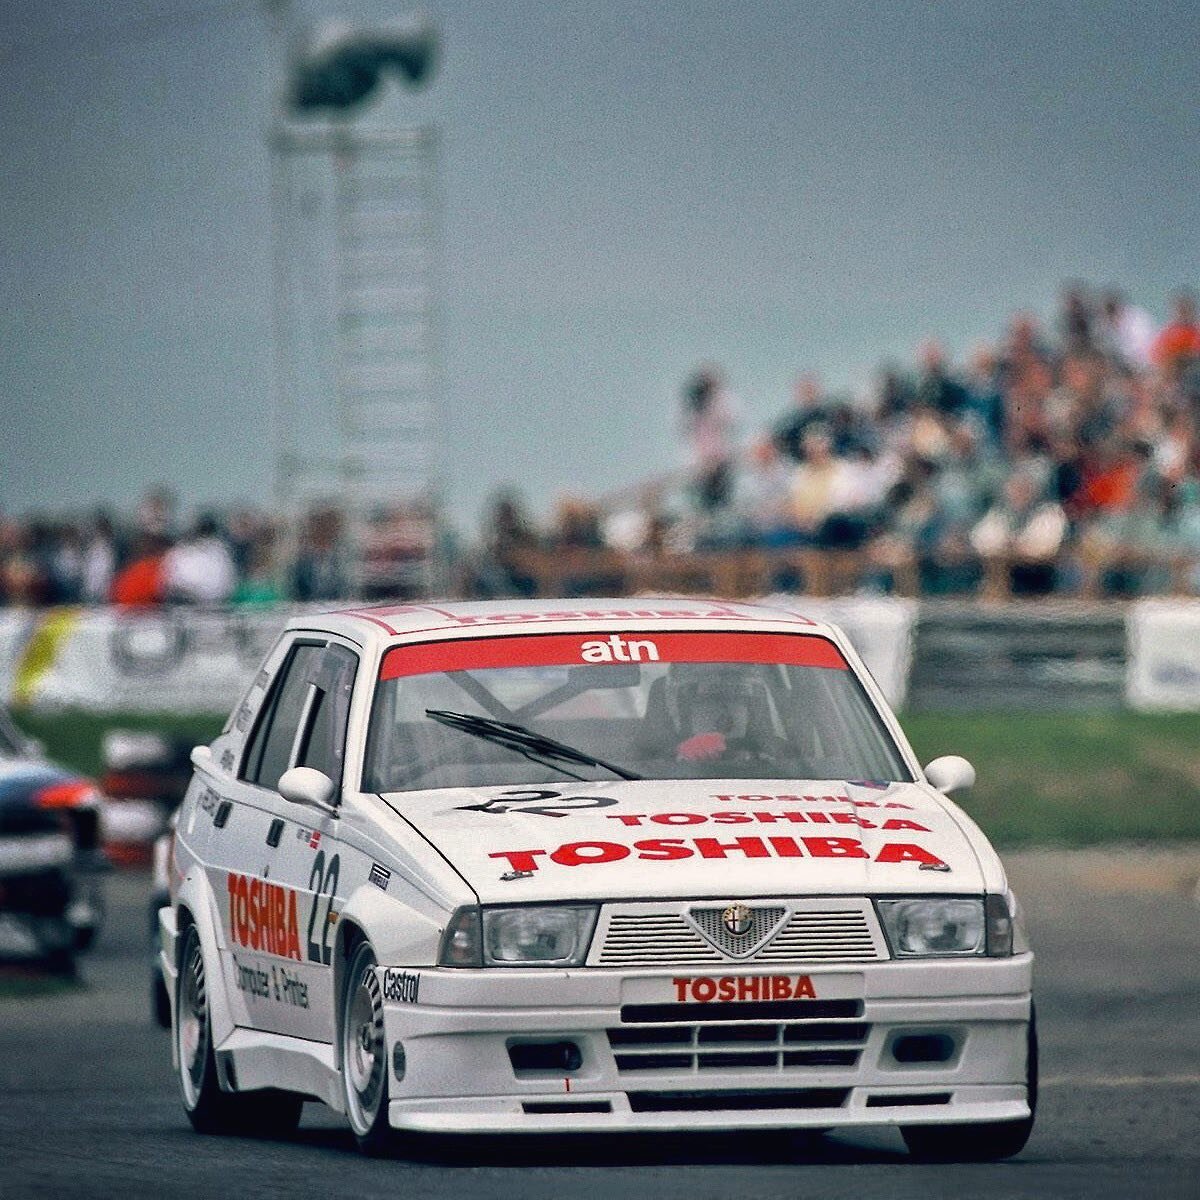 Kurt Thiim with the Alfa Romeo 75 Turbo Evoluzione at Mainz-Finthen, 5th round of the 1987 Deutsche Tourenwagen Meisterschaft. 

The Danish driver had clinched the title the year before with the Rover Vitesse but this campaign would prove a lot tough